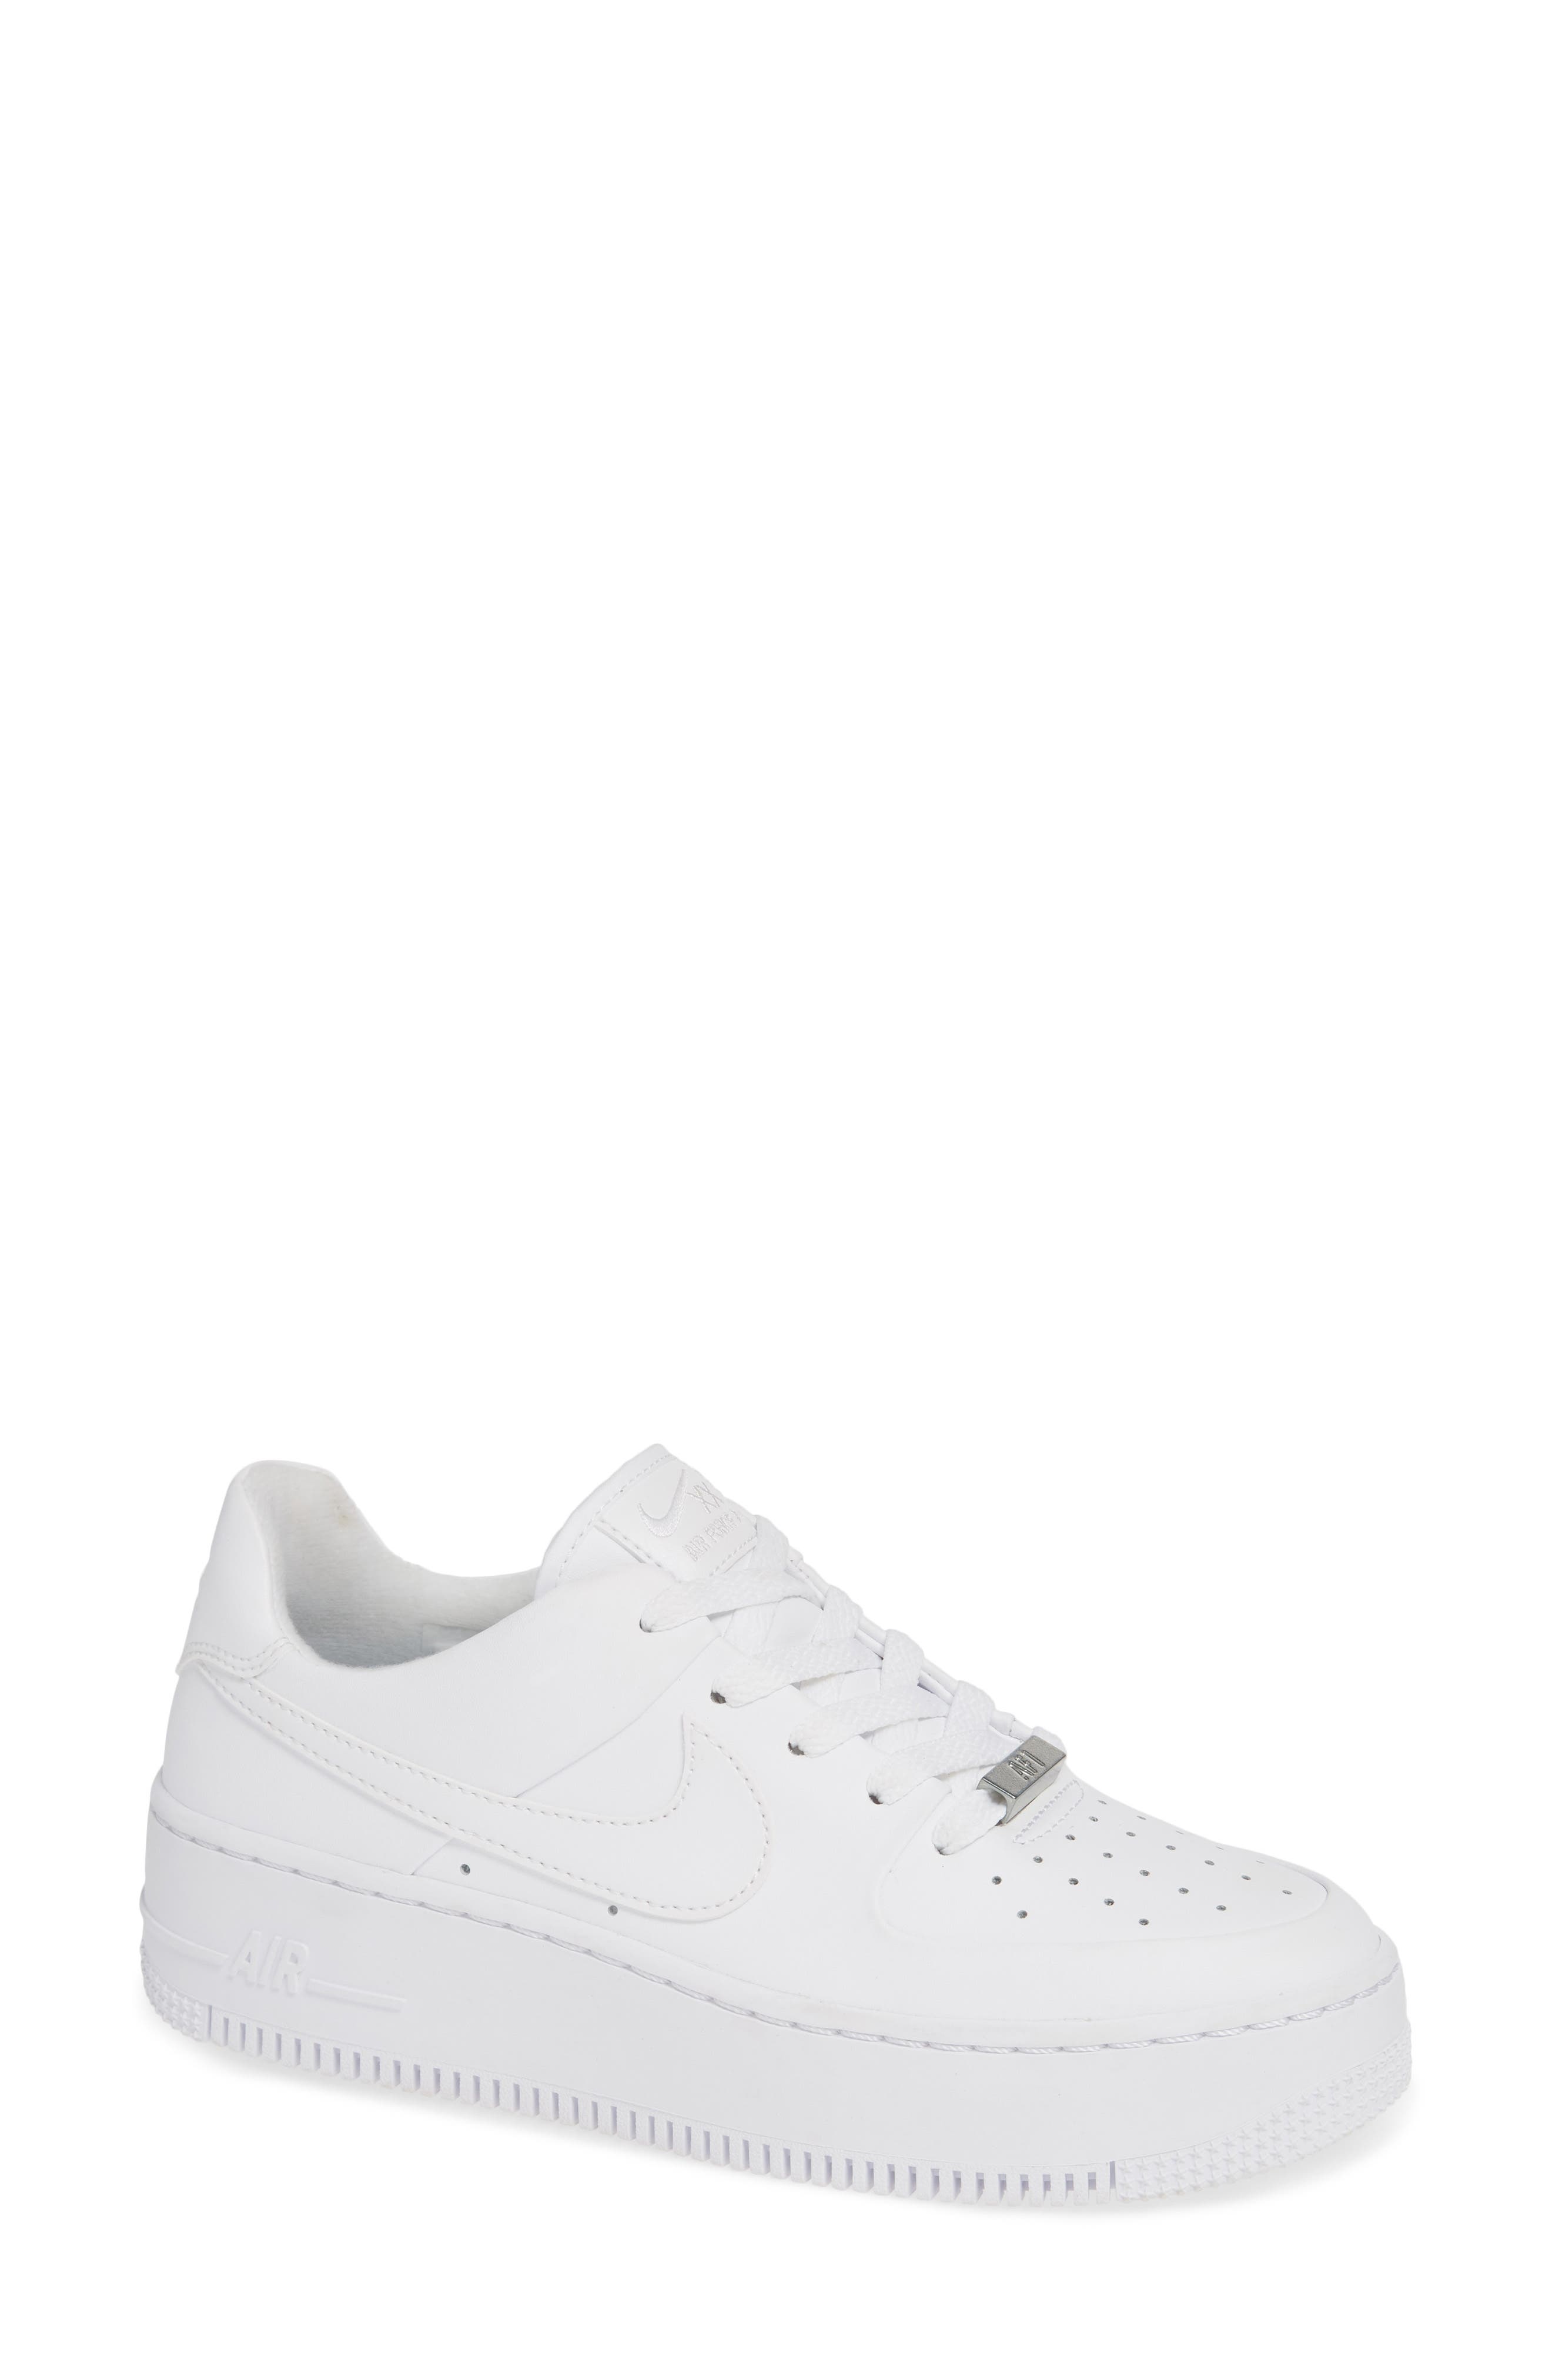 nike air force 1 sage low white womens